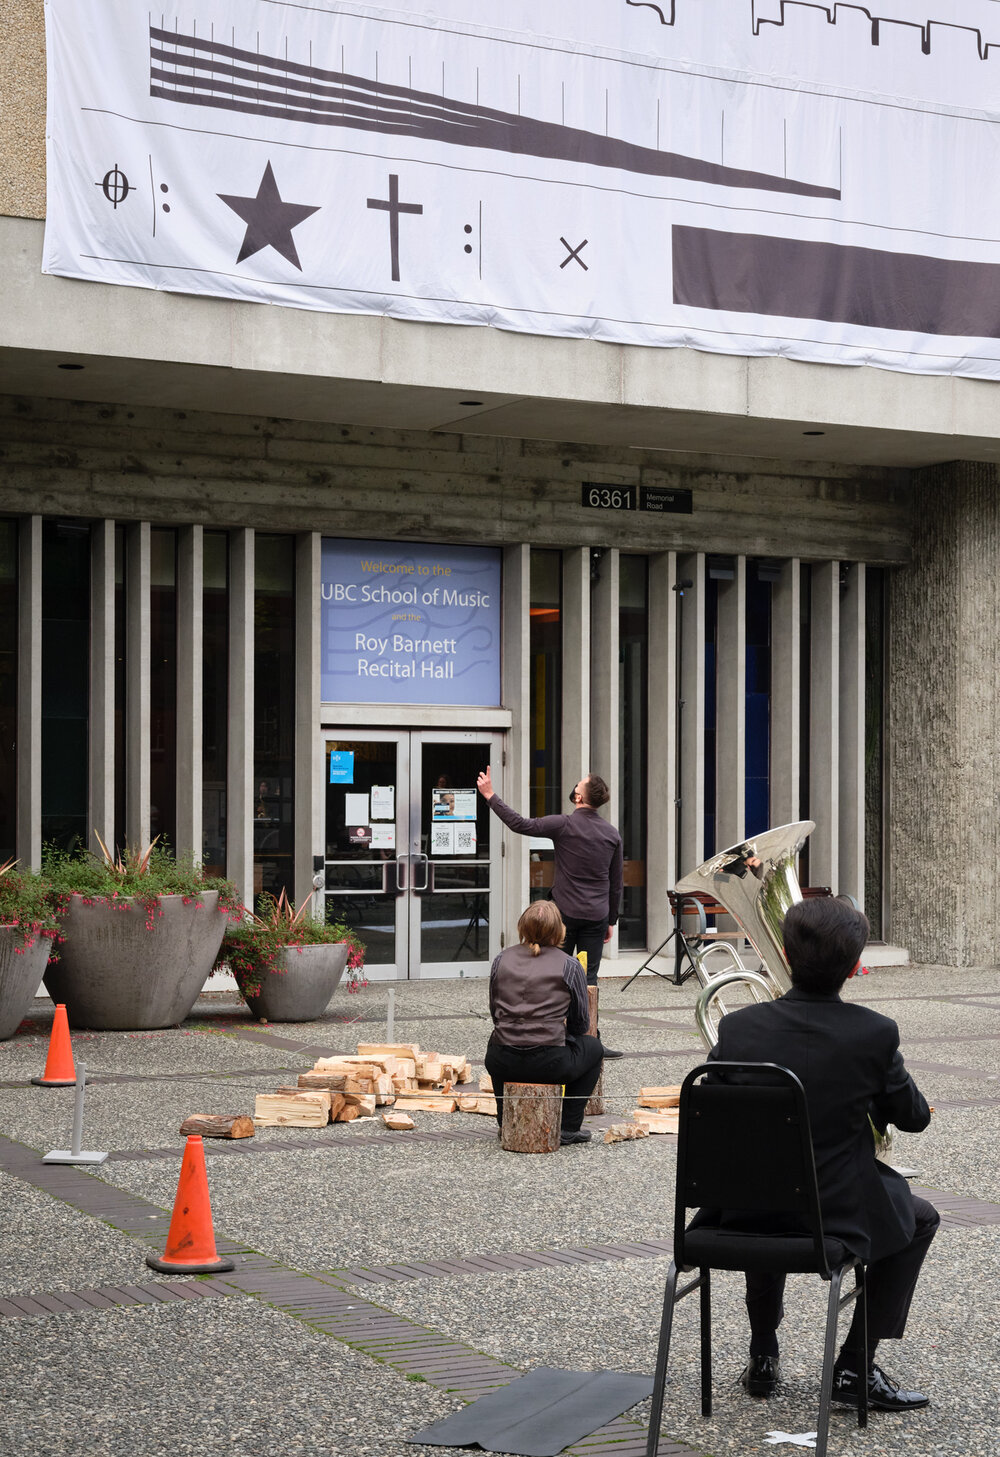  The UBC School of Music Symphonic Wind Ensemble, led by Robert Taylor, performs Raven Chacon’s work,  American Ledger (No. 1),  2018, outside the Music Building at the University of British Columbia, October 8, 2020, as part of&nbsp; Soundings: An E